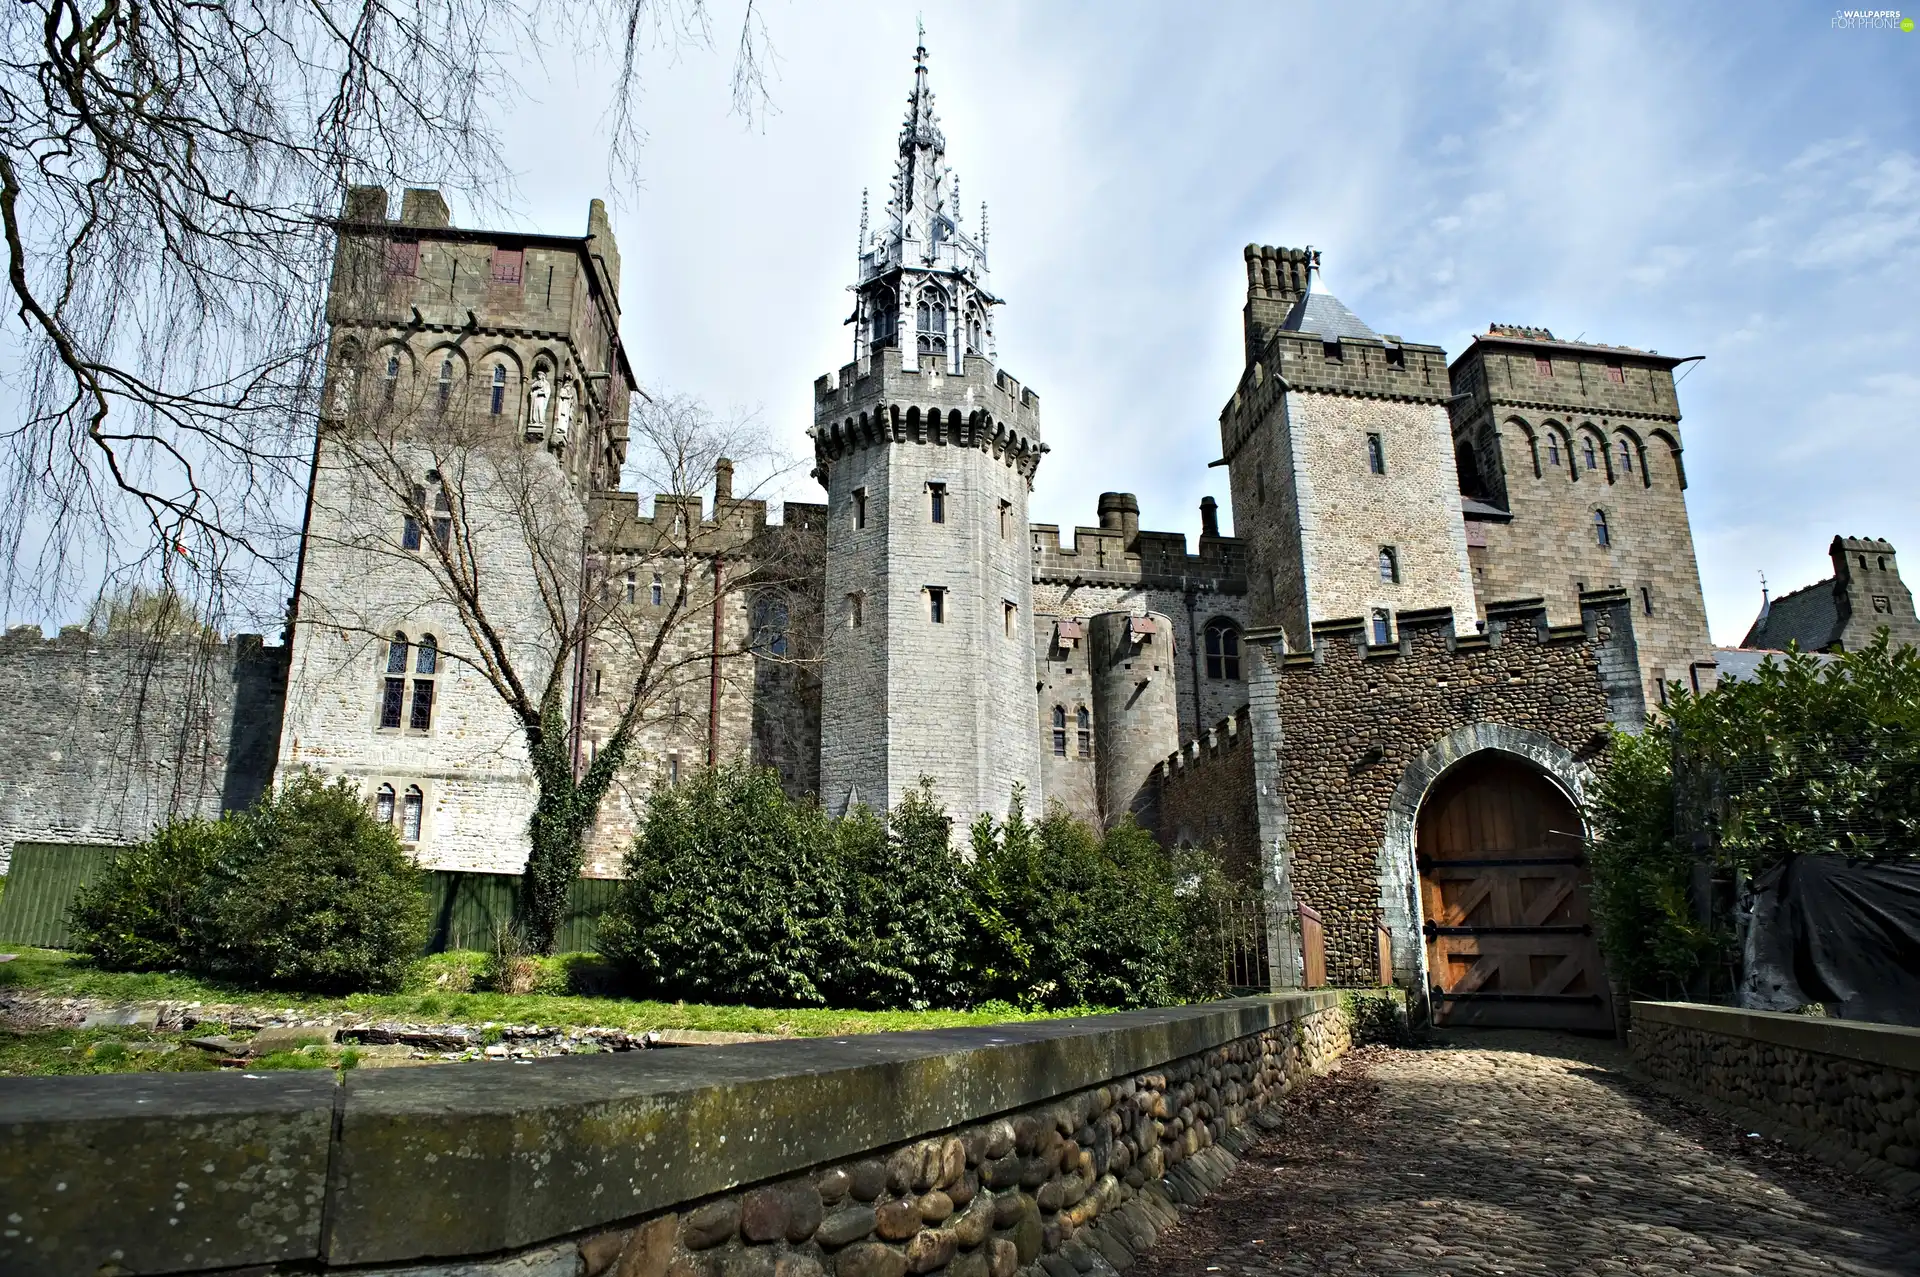 wales, Castle, Cardiff